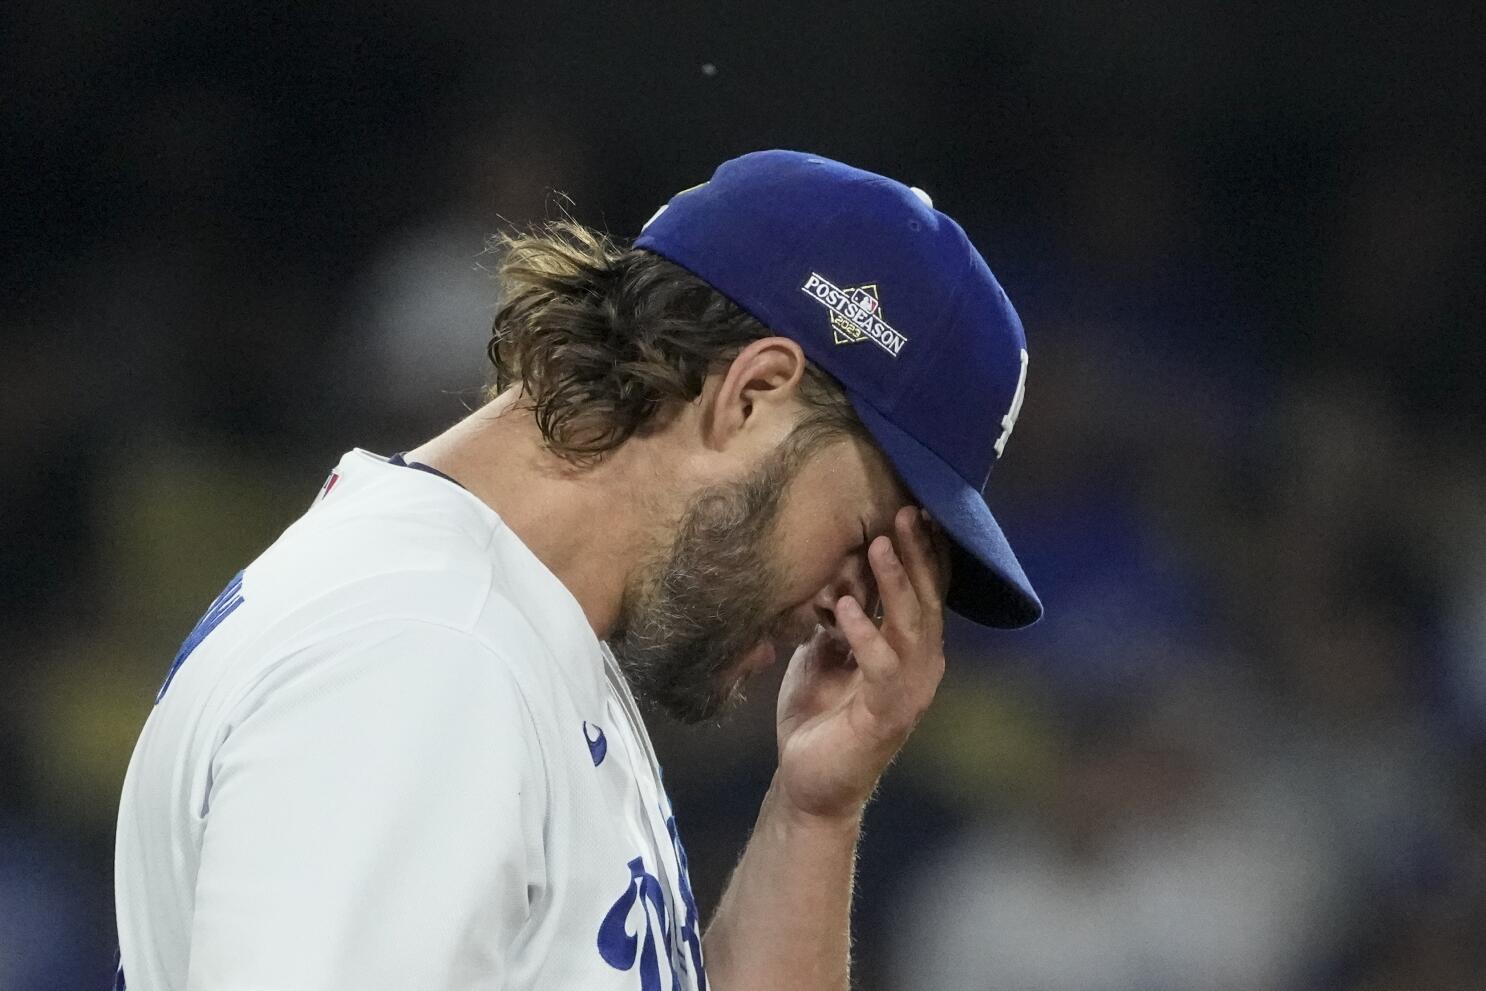 After Kershaw's debacle, the Dodgers look to regroup with a rookie against  the D-backs in NLDS - The San Diego Union-Tribune